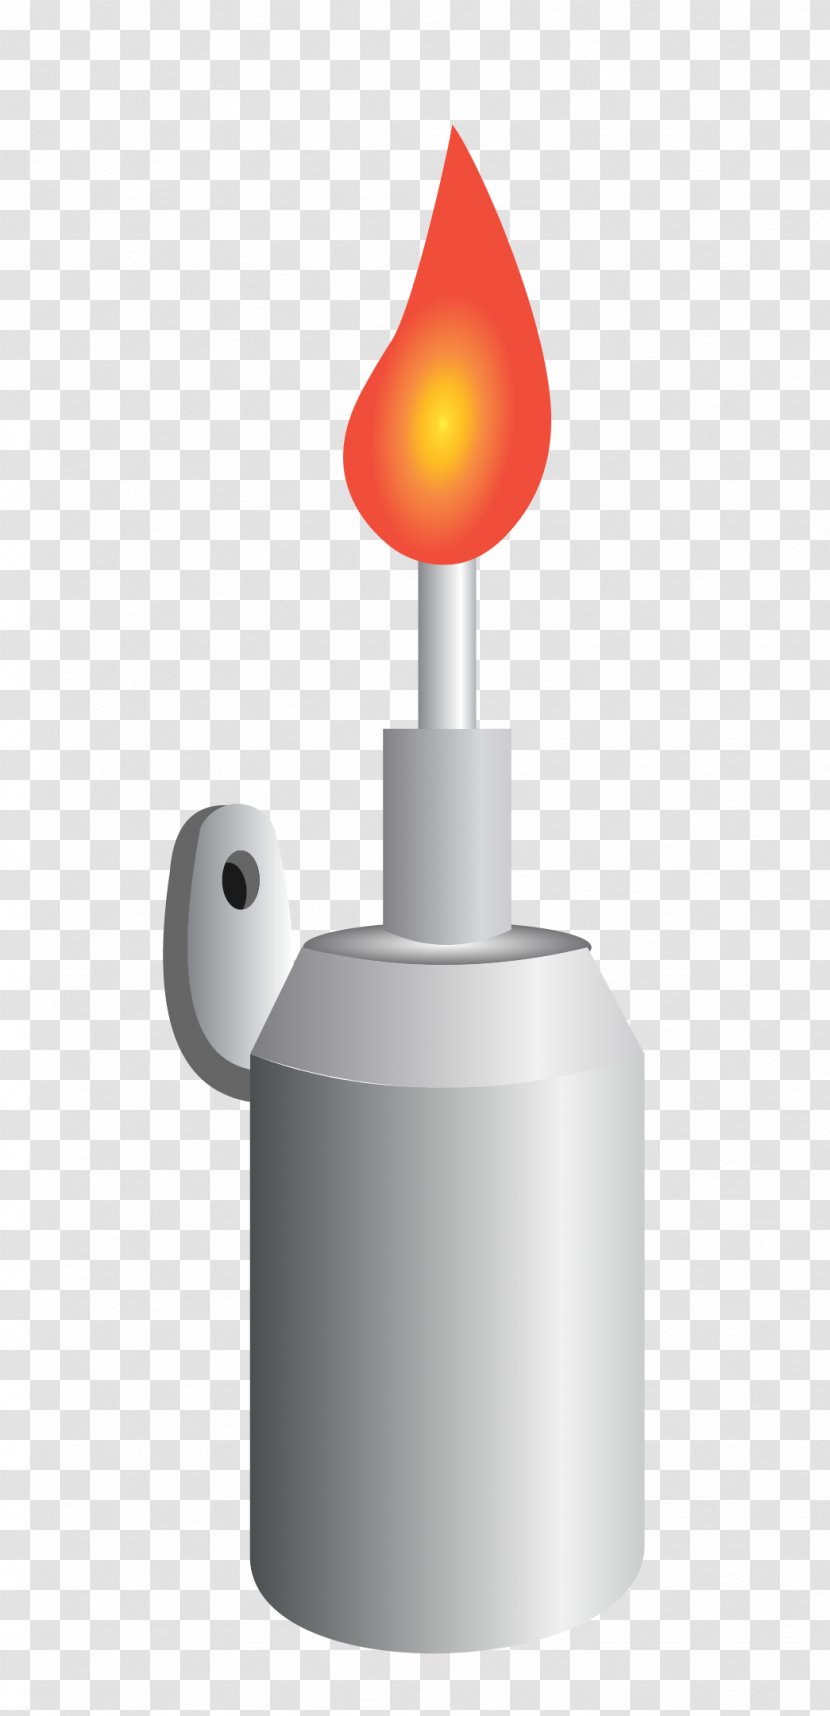 Lamp Download - Candle - Blessing Transparent PNG